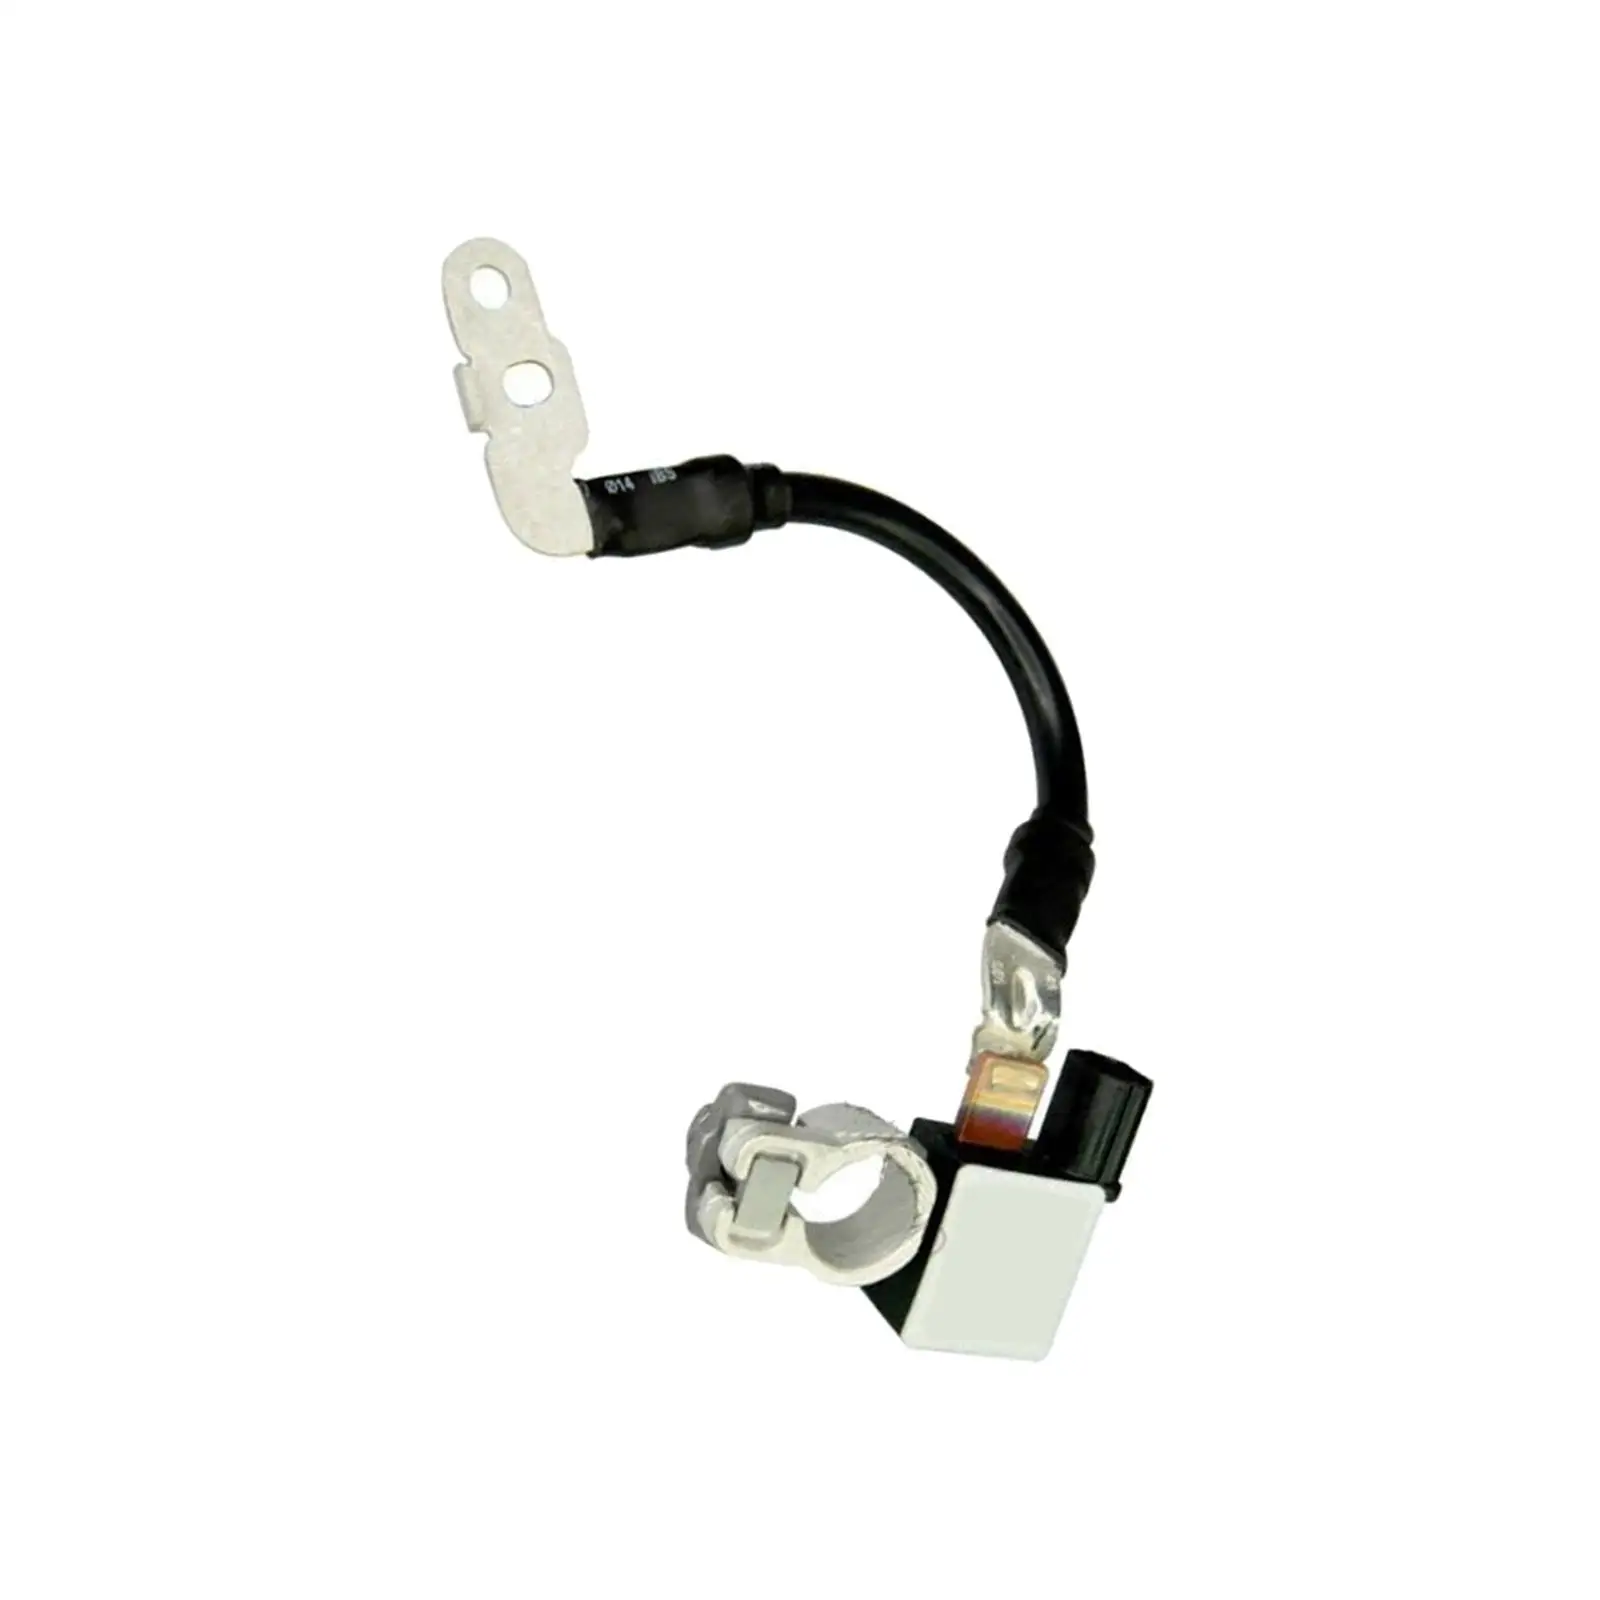 Vehicle Battery Negative Cable Sensor 37180-3x300 37180-A7000 37180A7000 for Hyundai Elantra 2014-2016 Direct Replaces